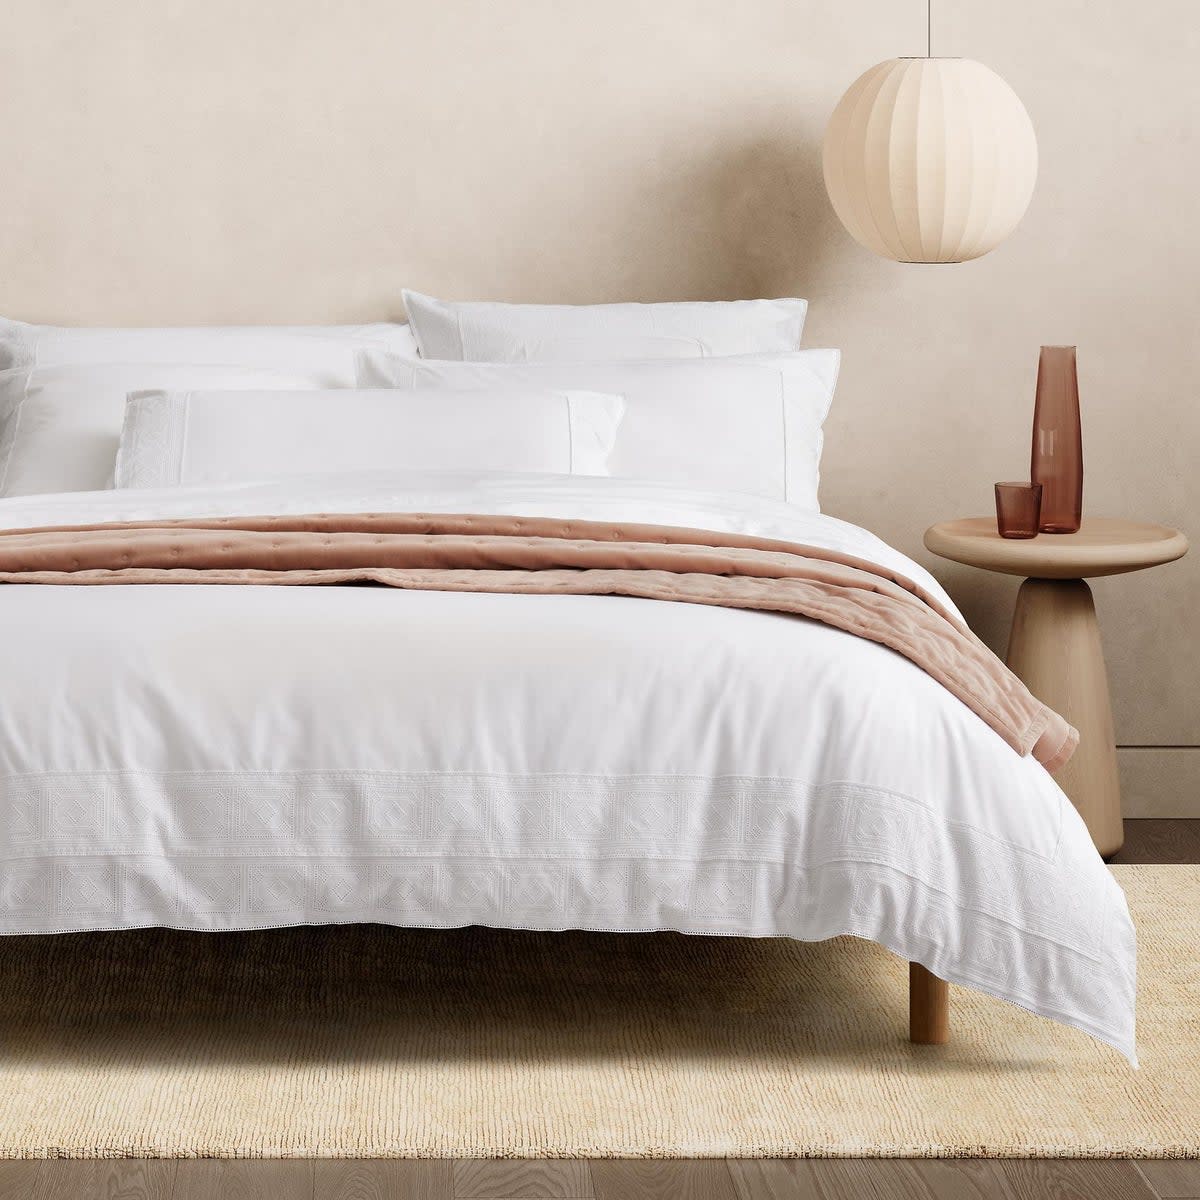 Try to have natural cotton, linen, or silk fibres for both clothing and bed sheets (Sherdian)